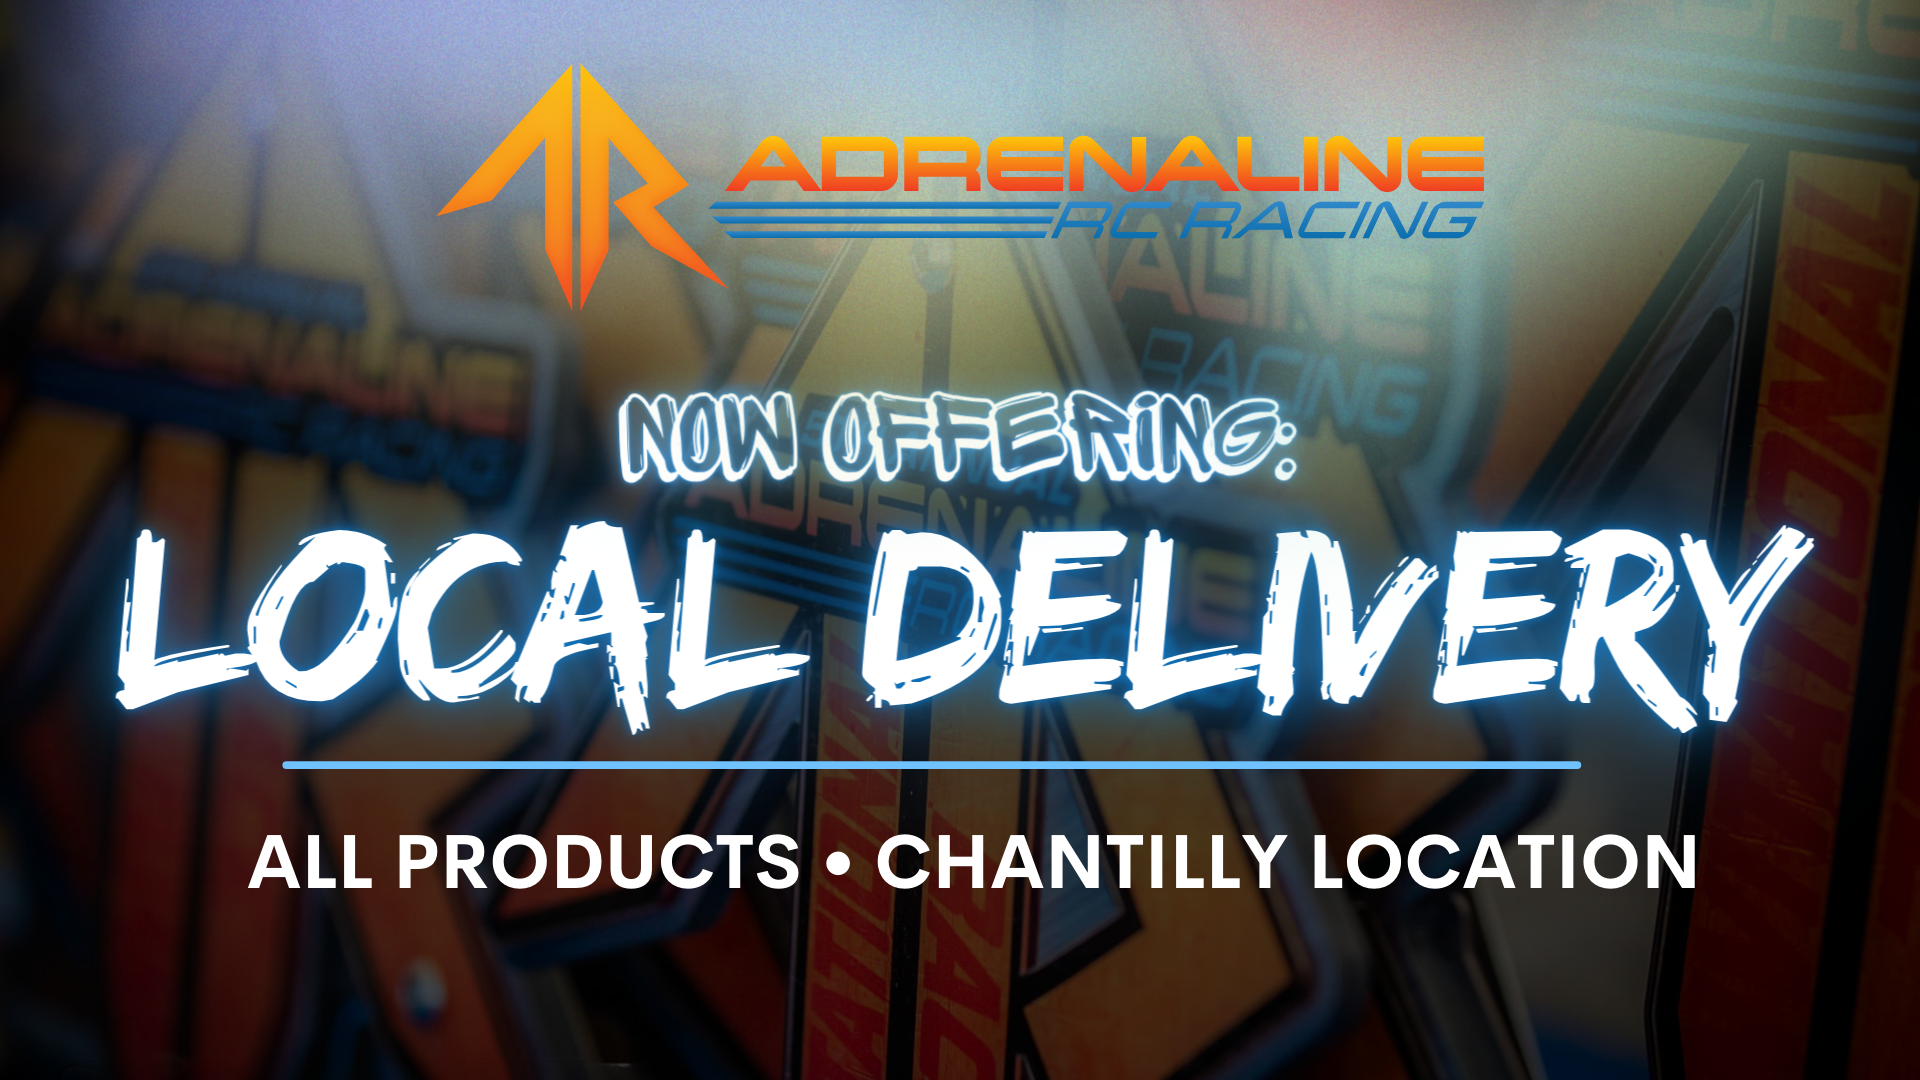 Adrenaline RC Racing Rolls Out Exciting Local Delivery Service!